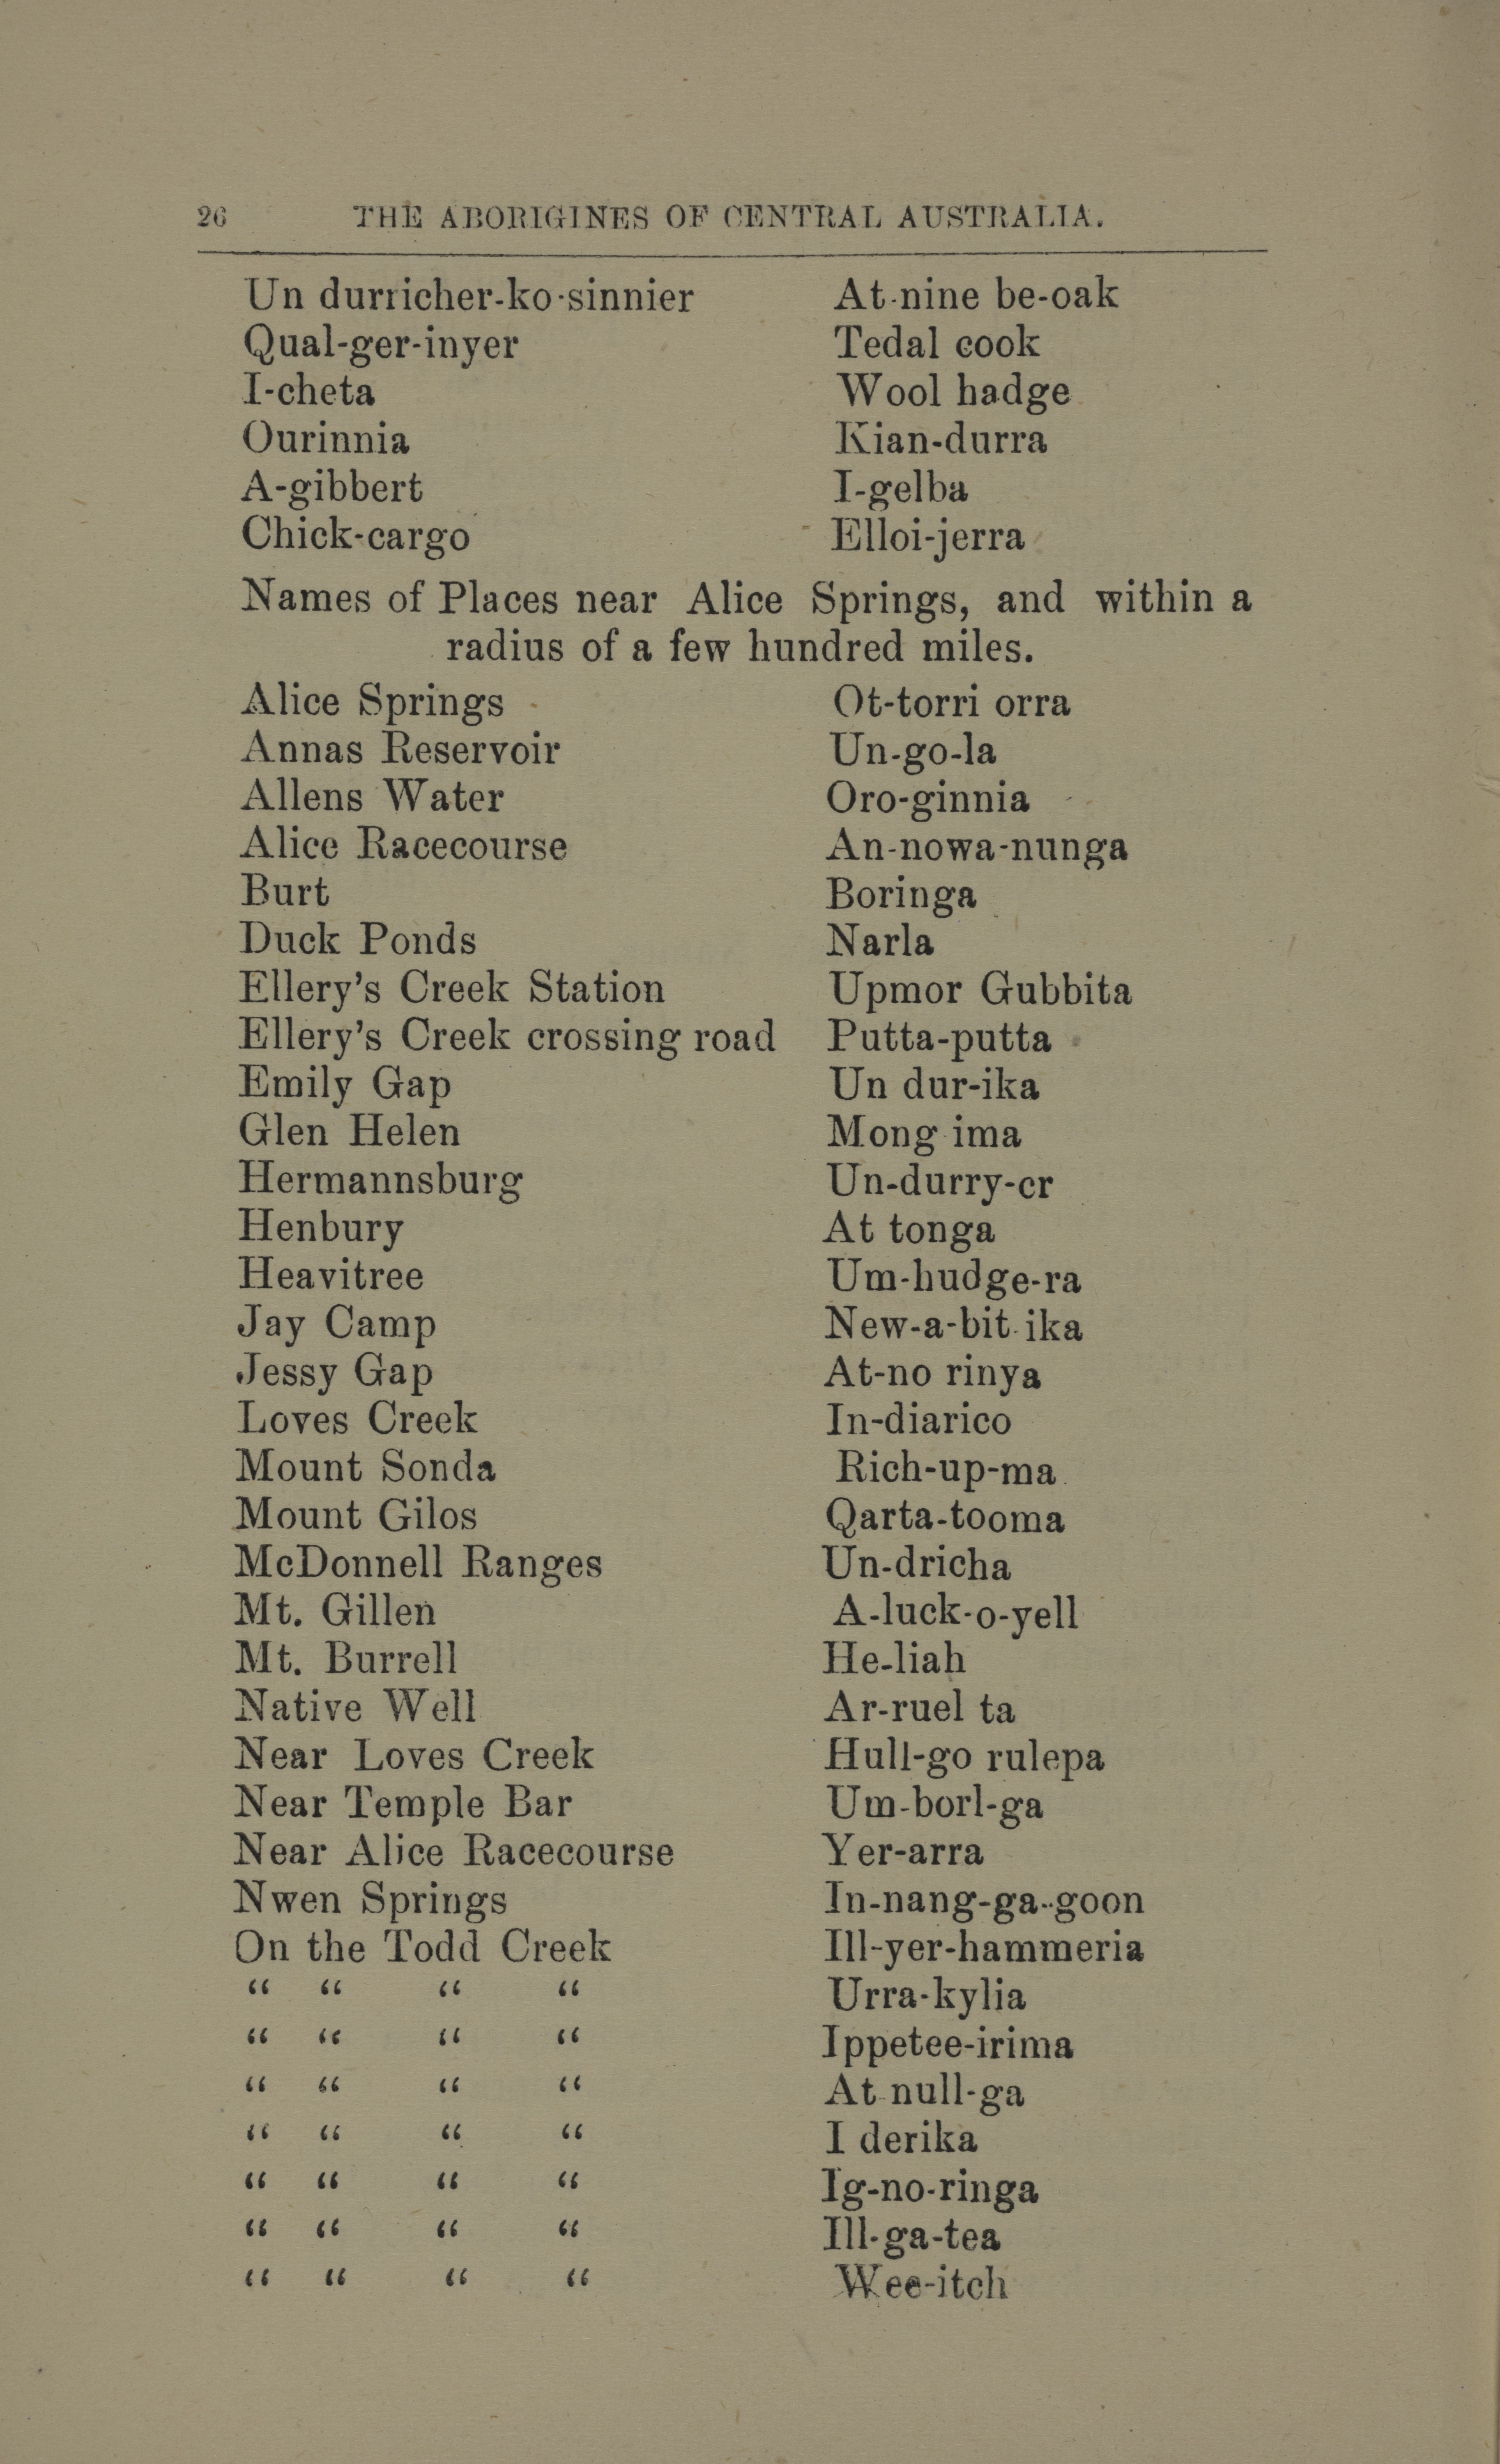 Extract from book The Aborigines of Central Australia showing English and Aboriginal names for places around Alice Springs.